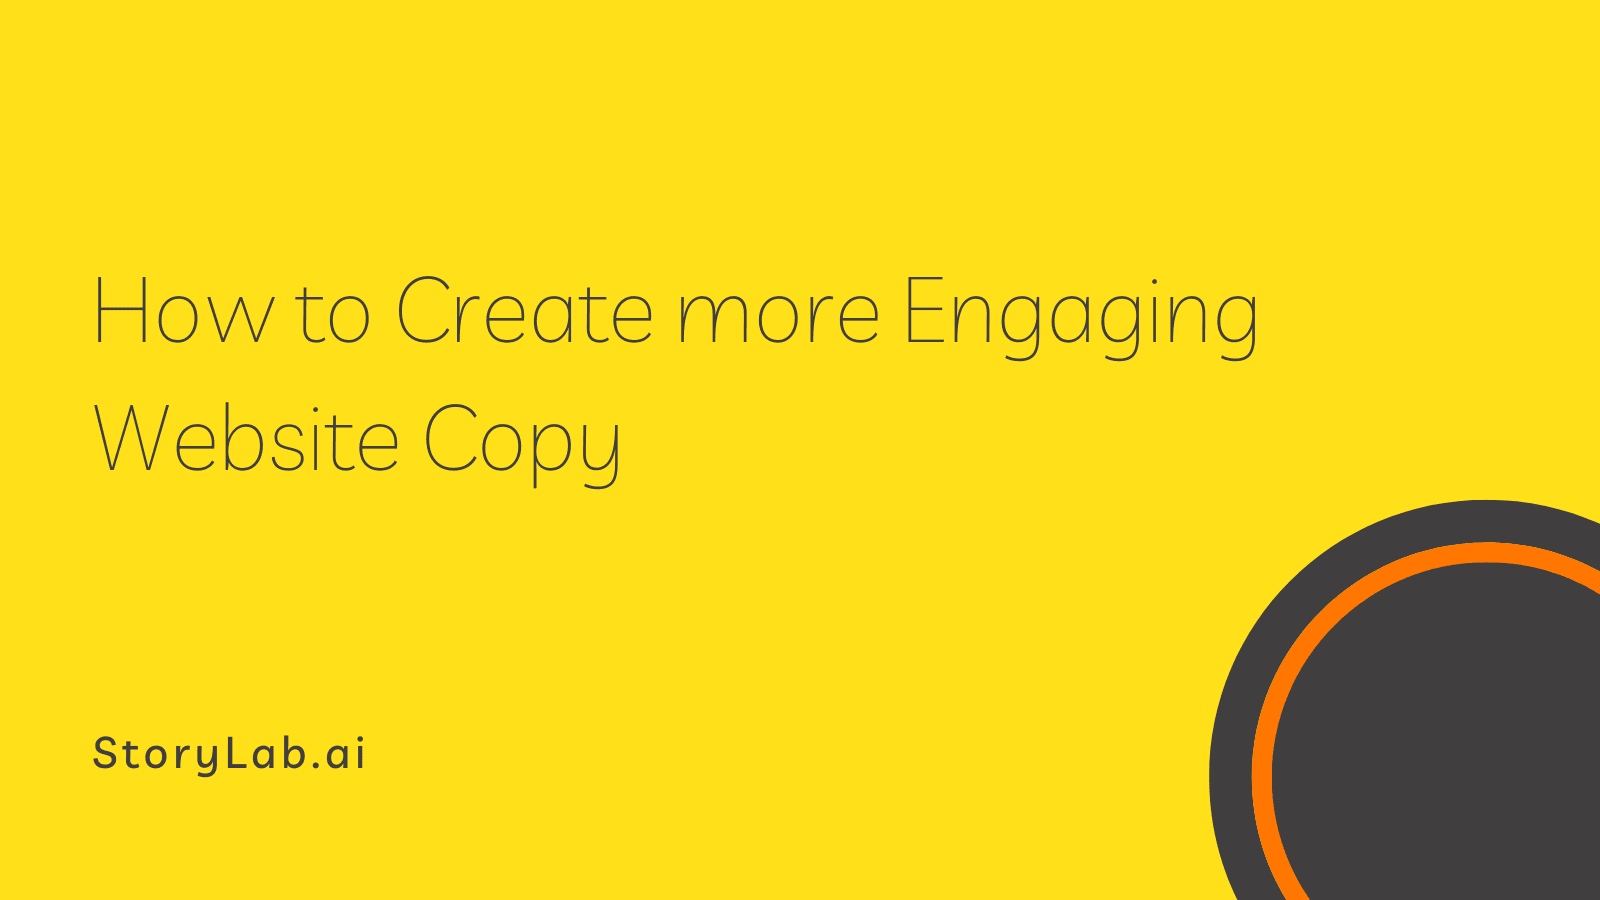 How to Create more Engaging Website Copy